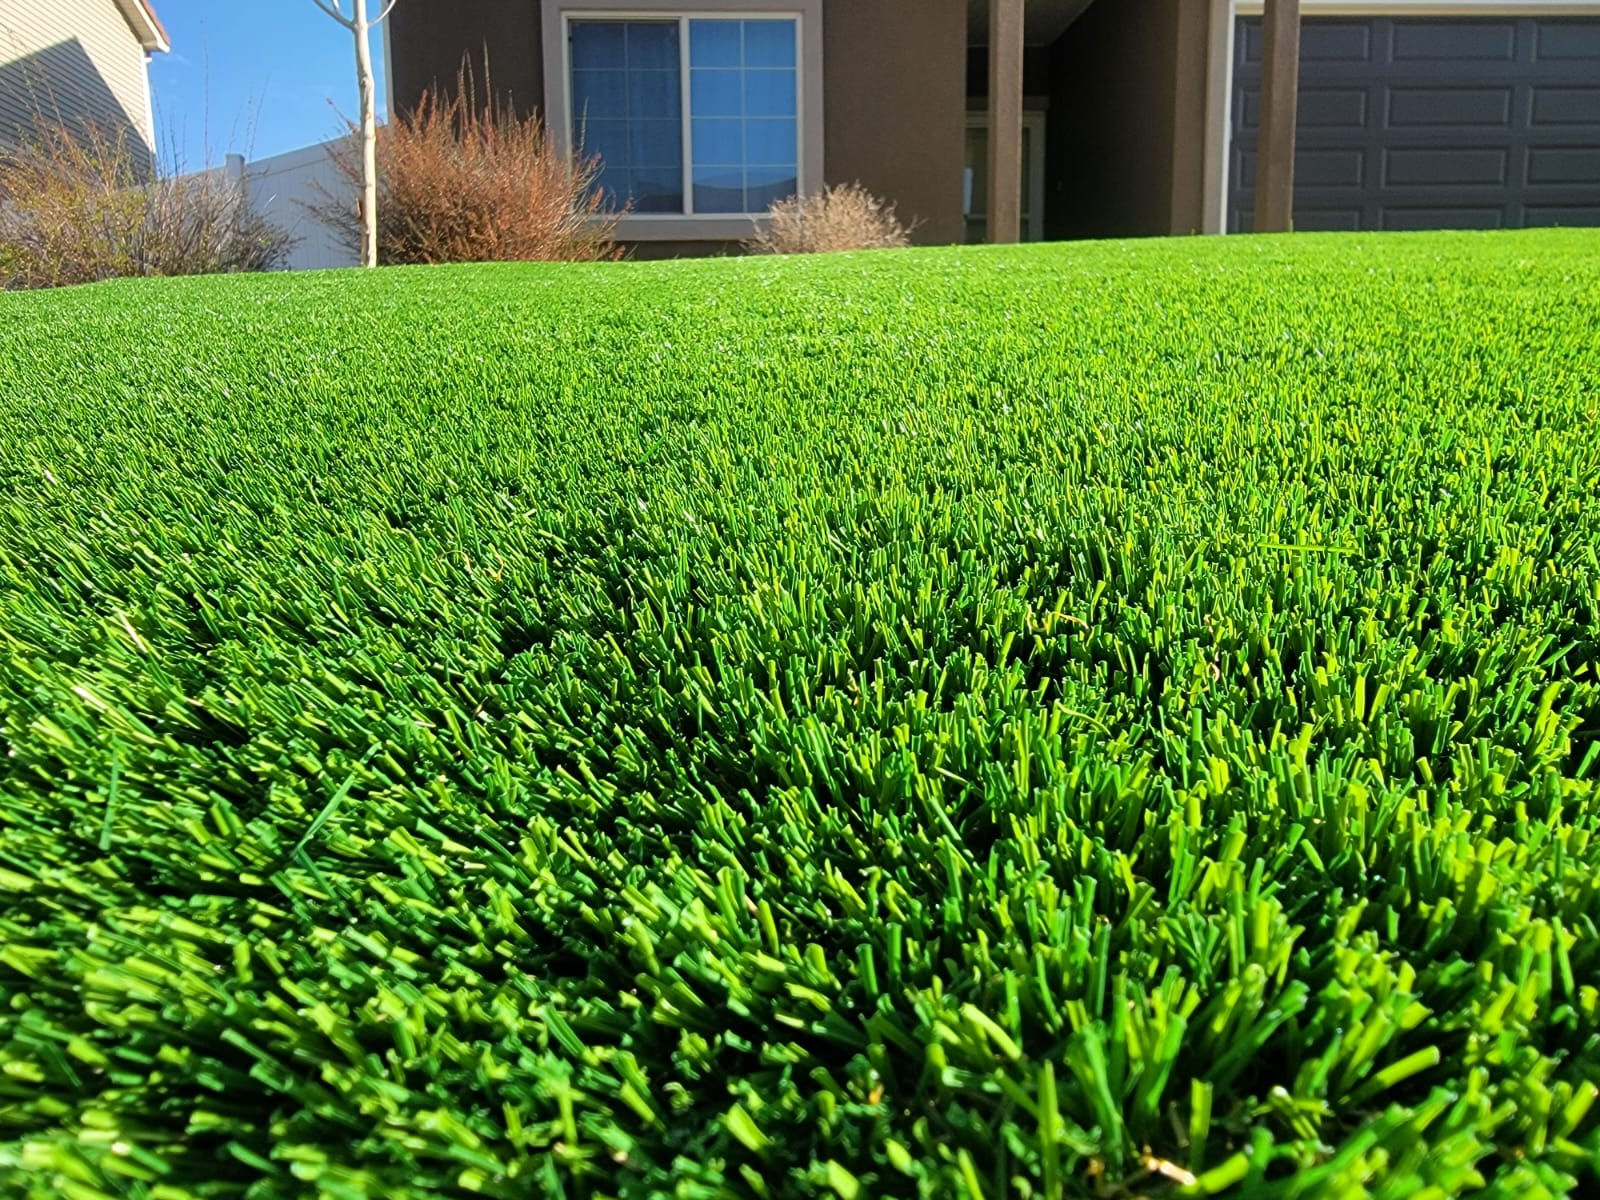 Why Use a Sand Infill for Artificial Grass?